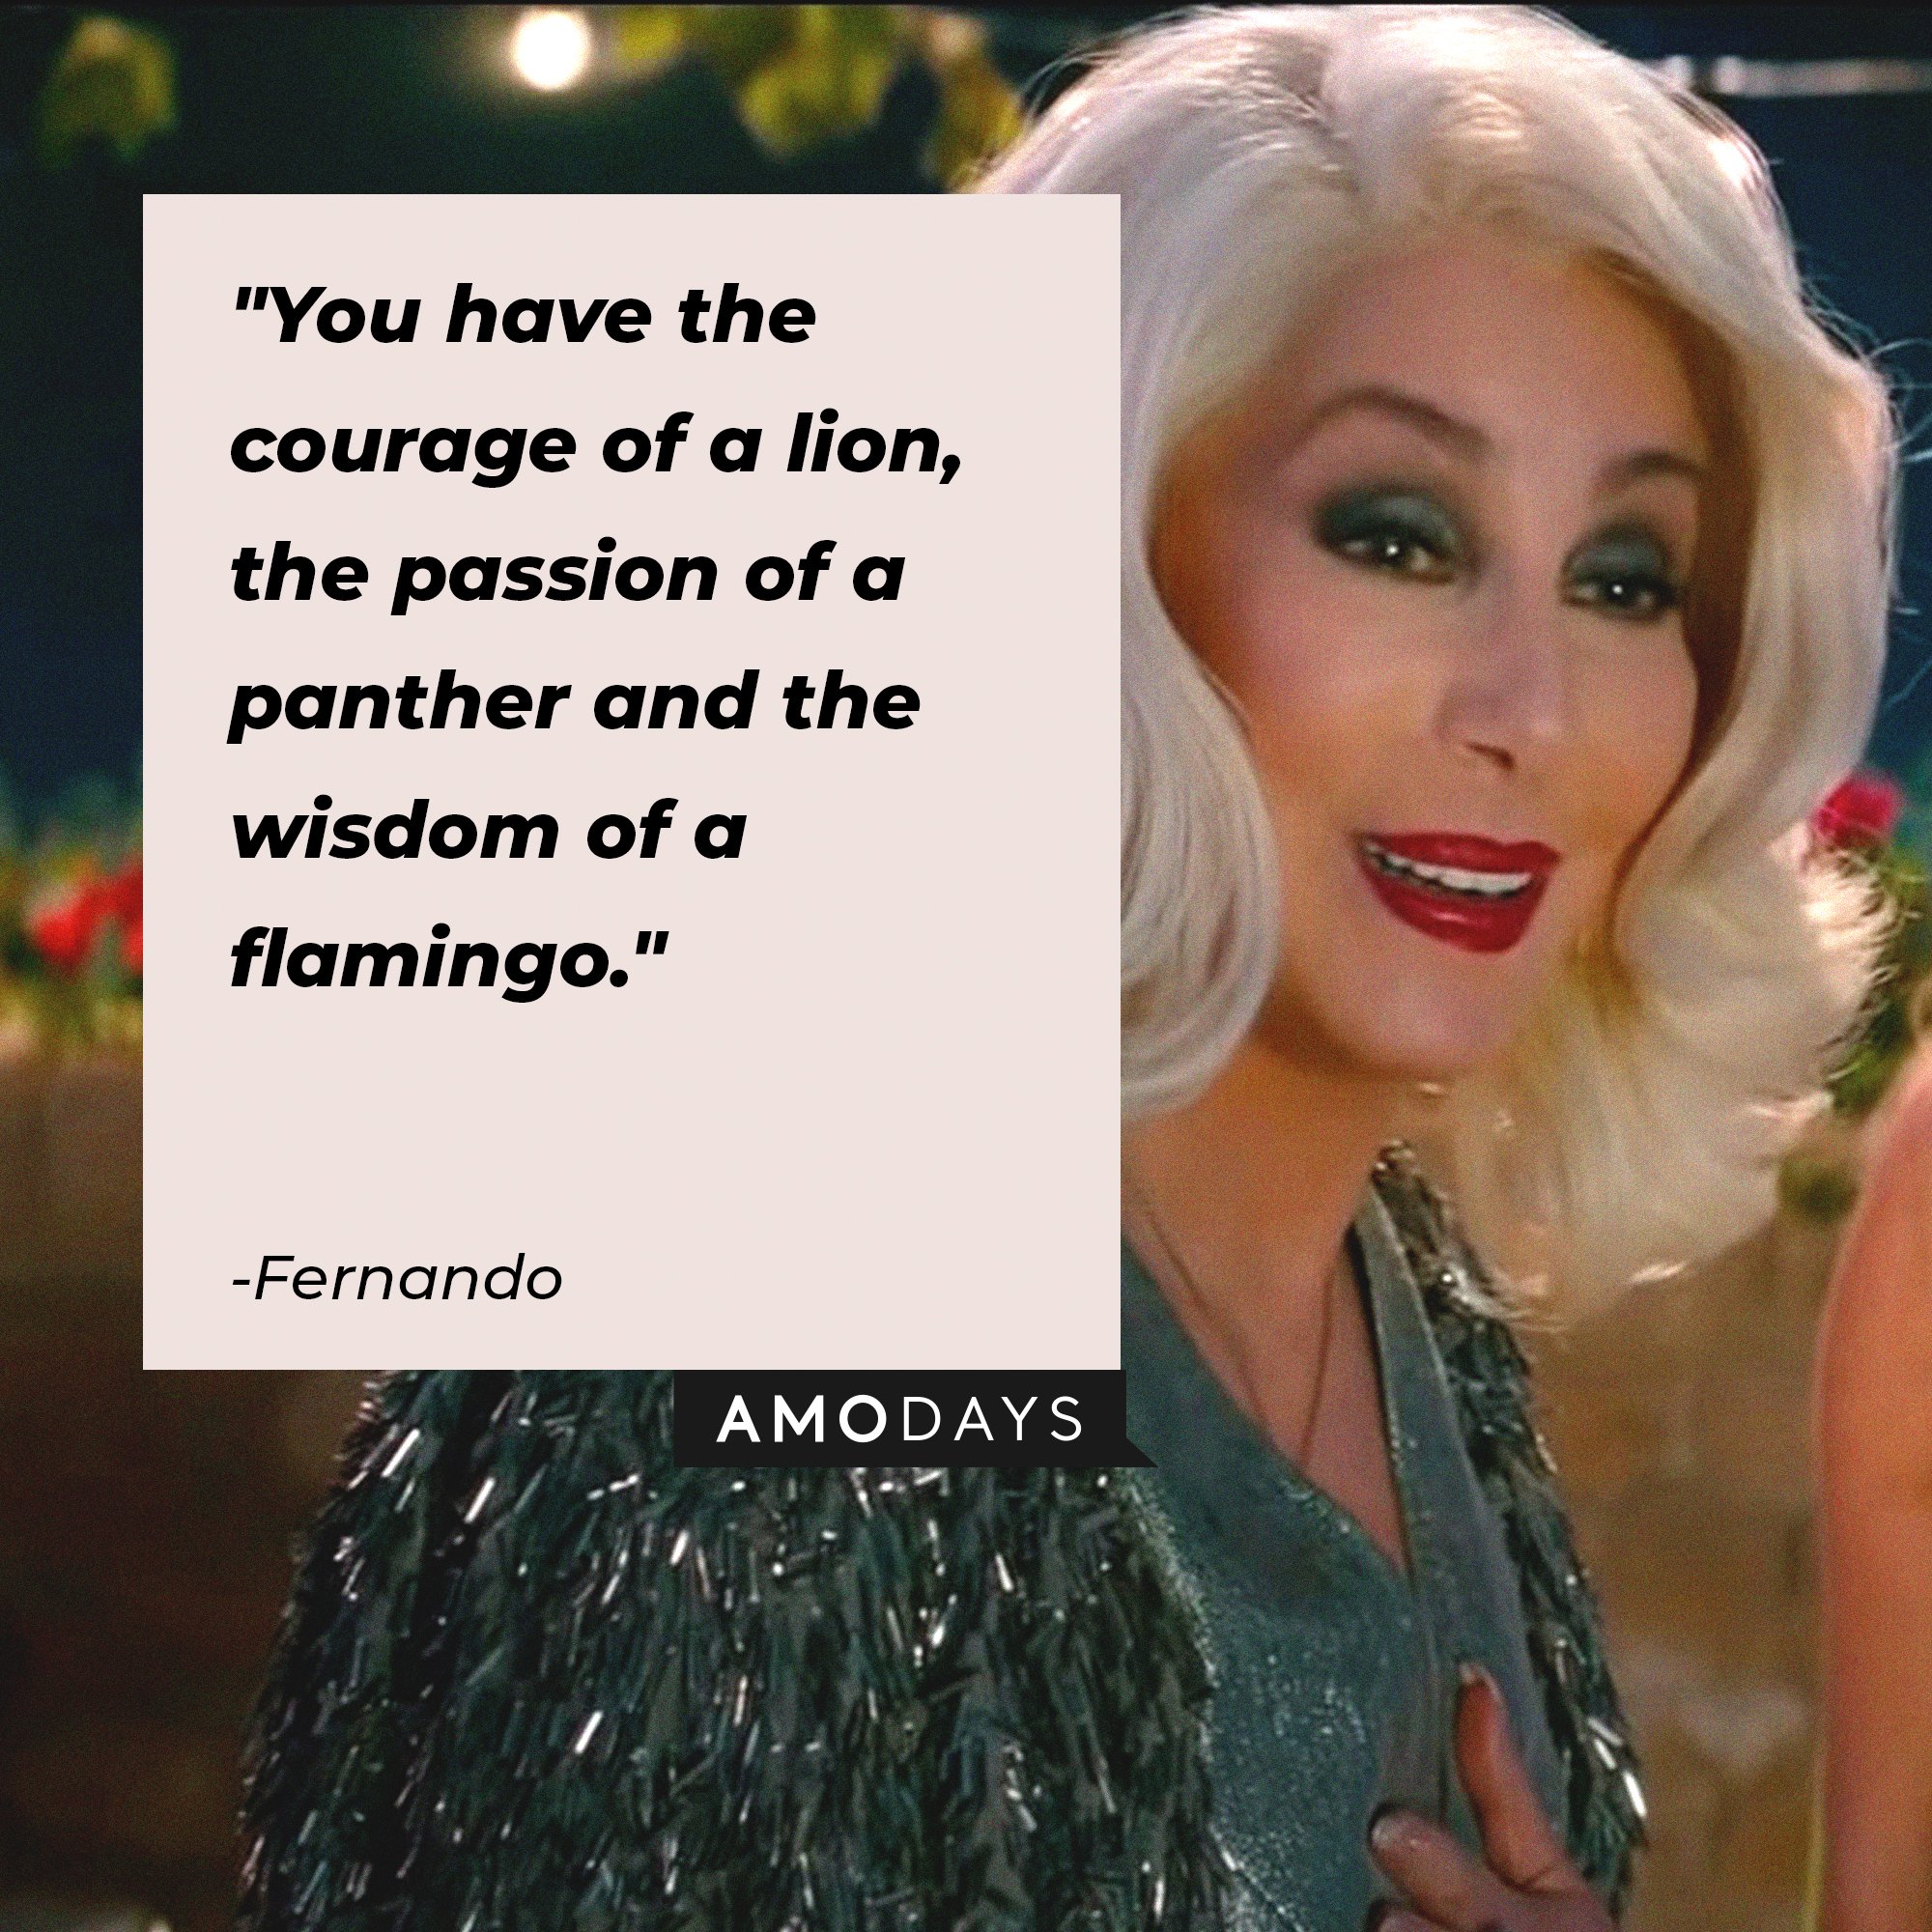 Fernando's quote: "You have the courage of a lion, the passion of a panther and the wisdom of a flamingo." | Image: AmoDays